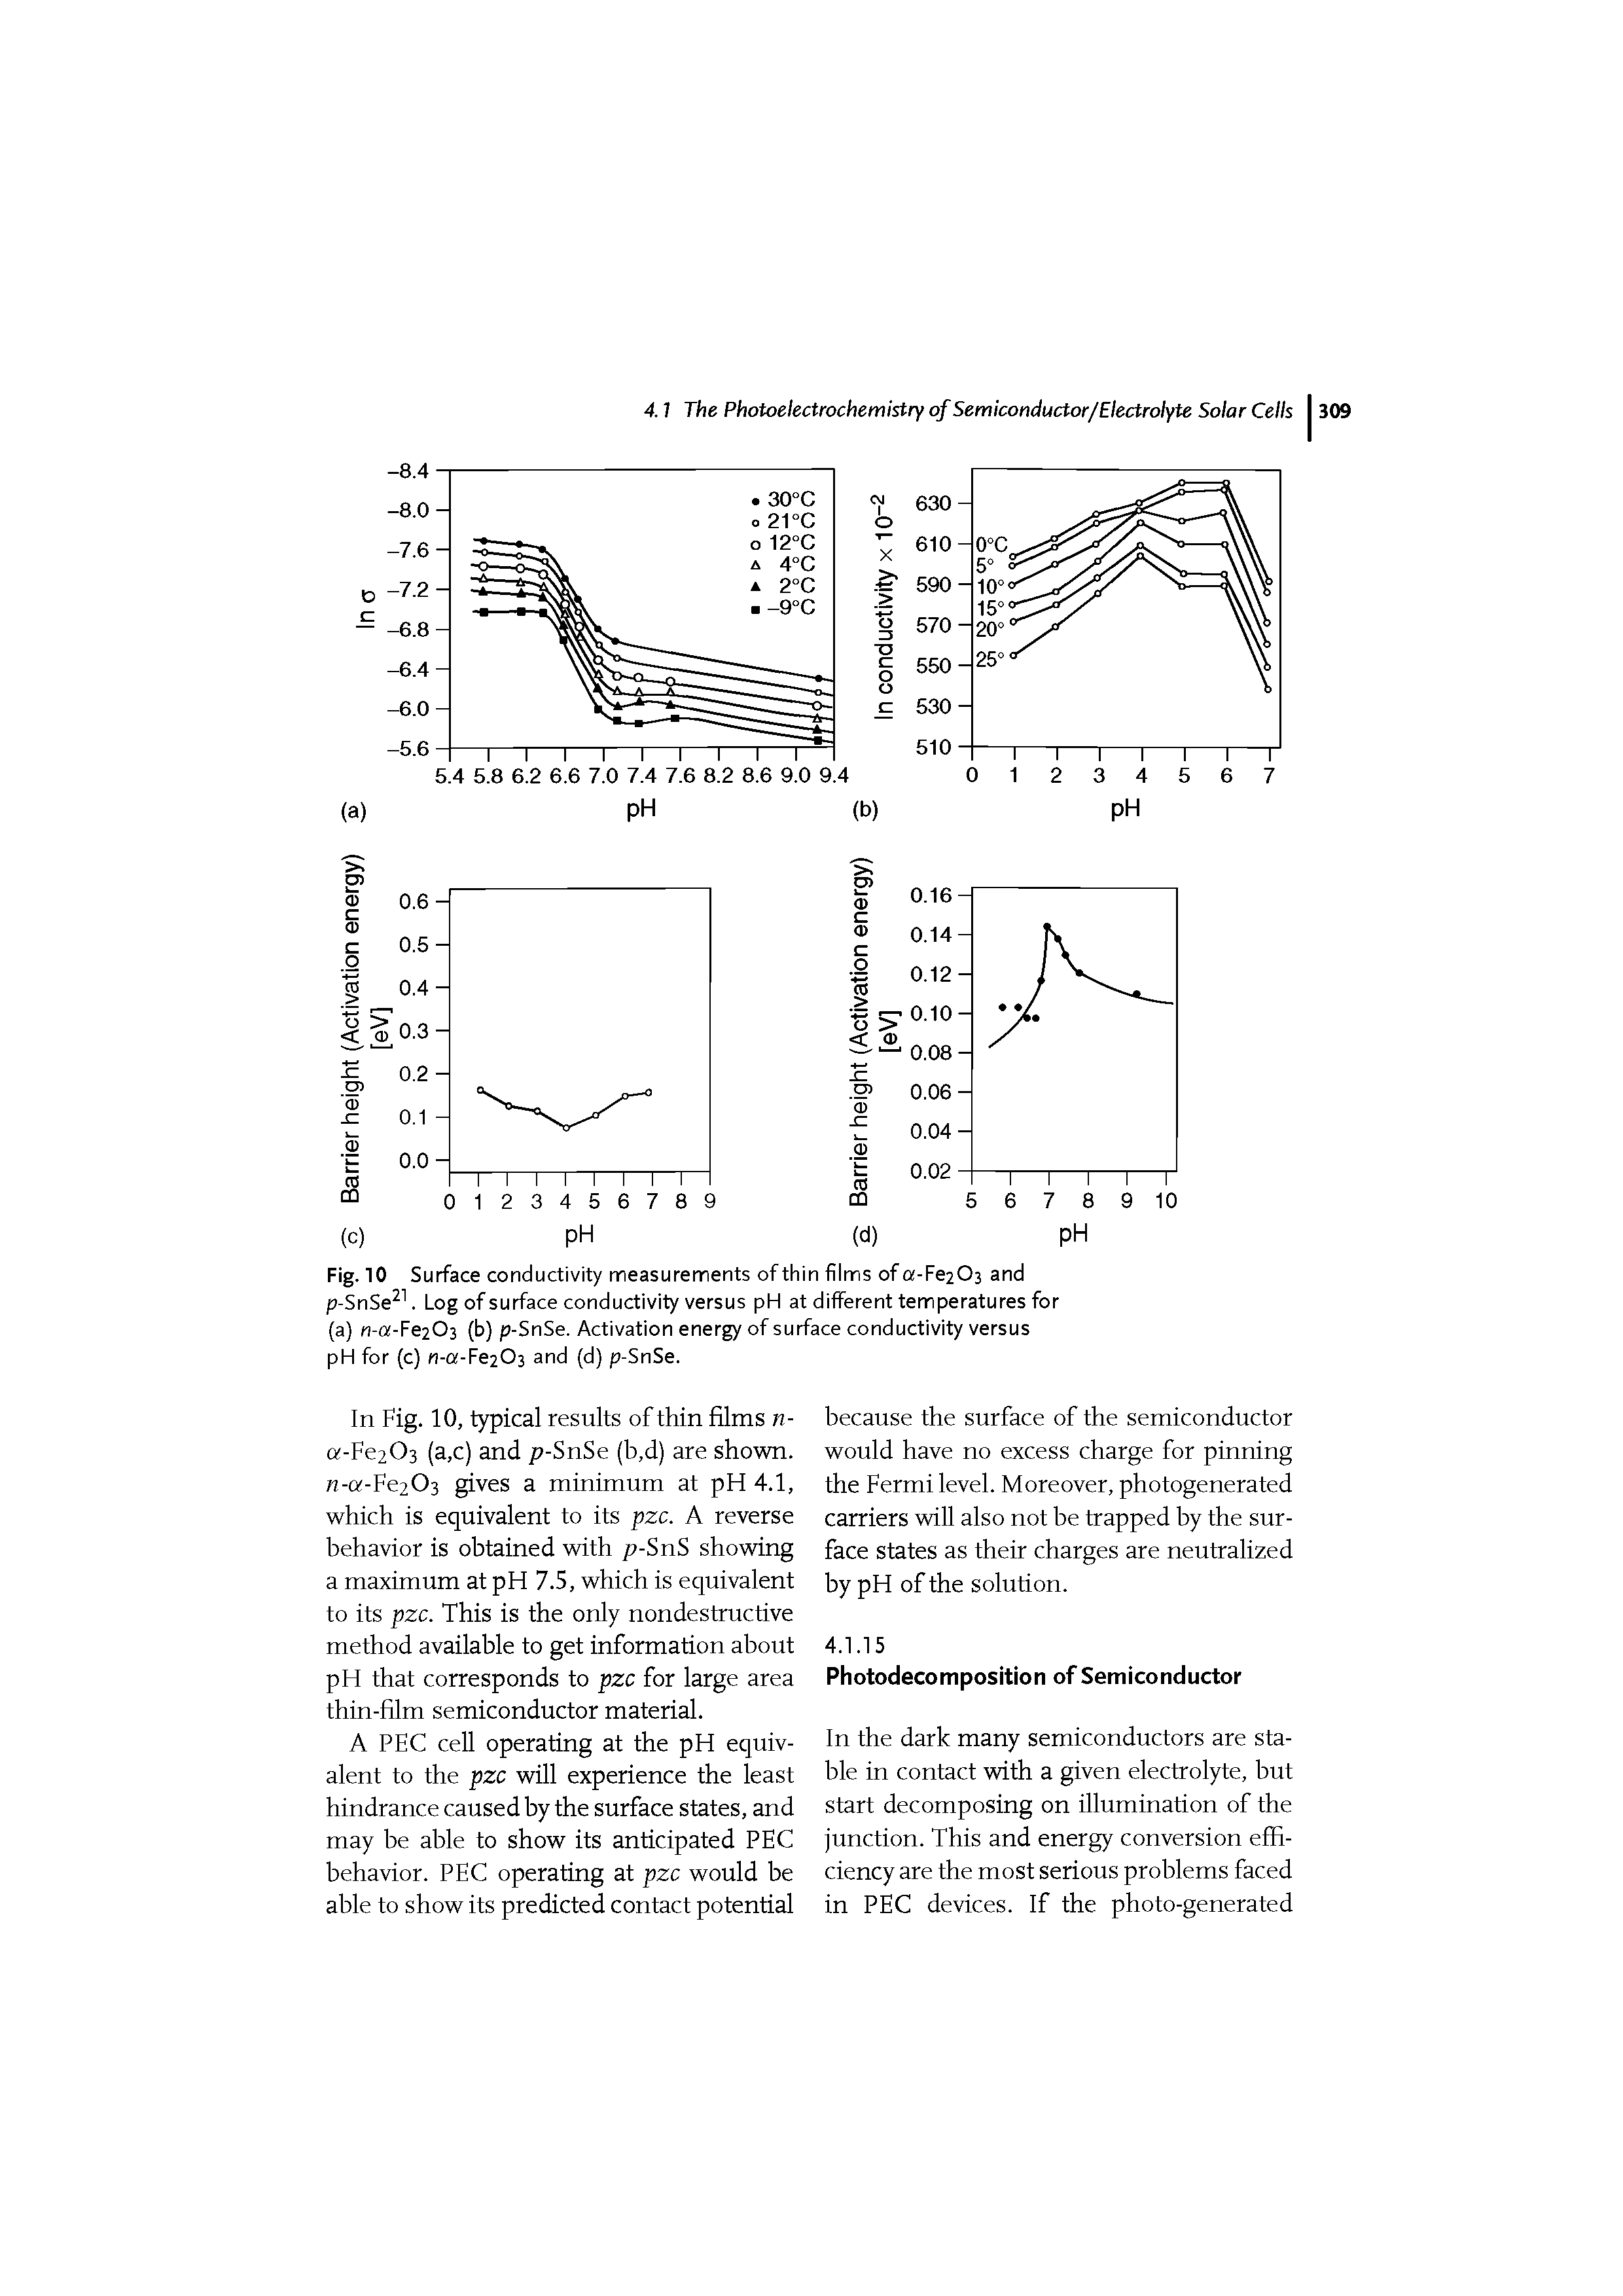 Fig. 10 Surface conductivity measurements of thin films ofa-Fe203 and p-SnSe. Log of surface conductivity versus pH at different temperatures for (a) n-a-FeiO-i (b) p-SnSe. Activation energy of surface conductivity versus pH for (c) n-0 -Fe2O3 and (d) p-SnSe.